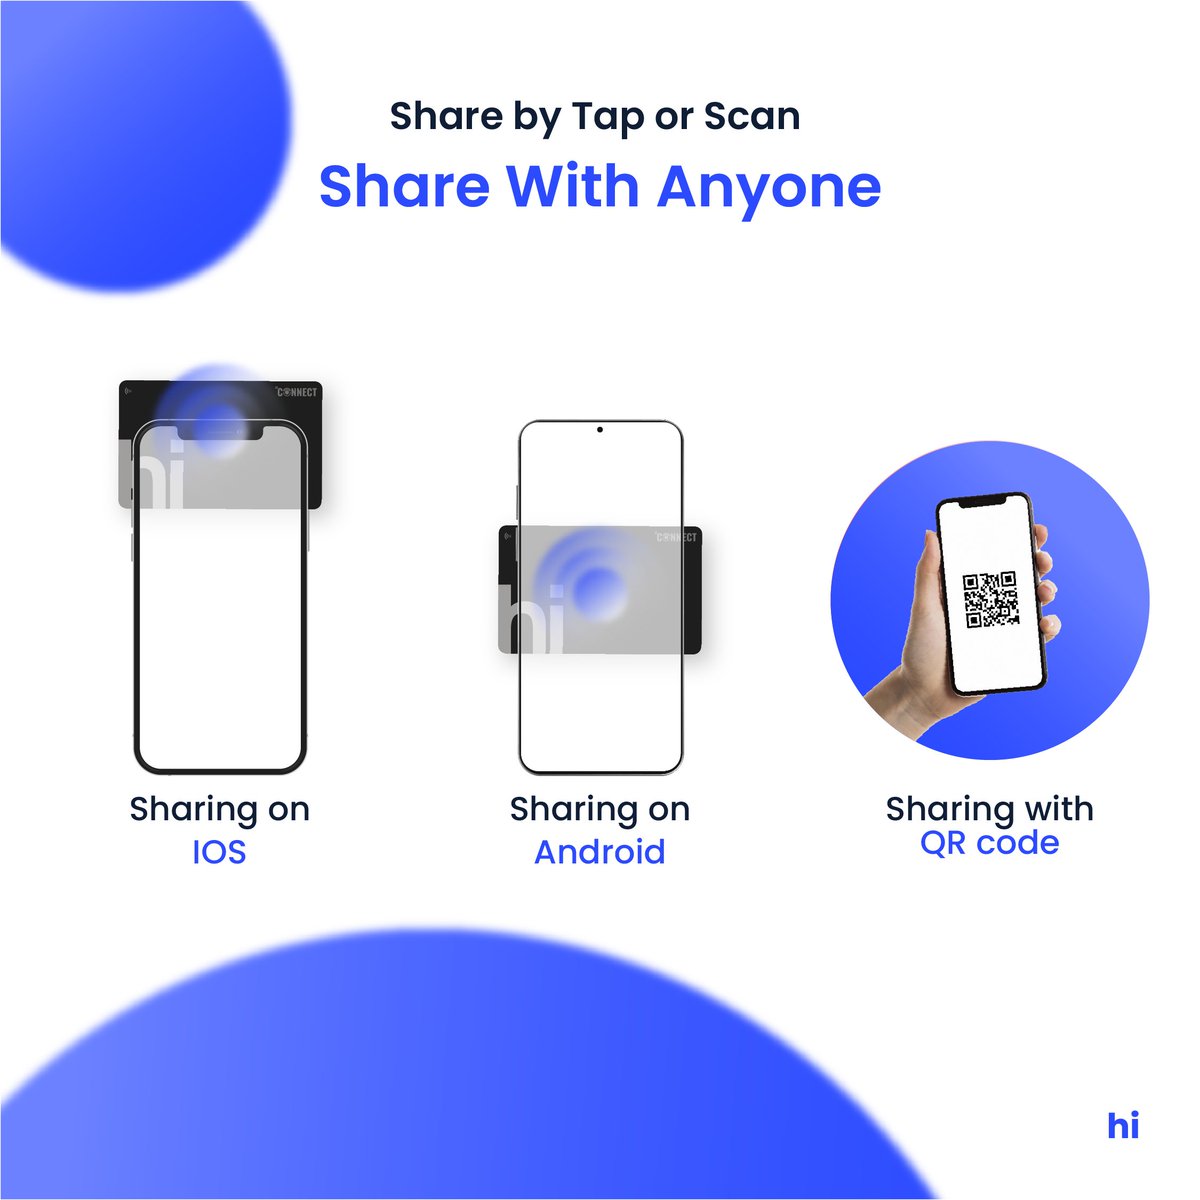 Share your info and capture leads instantly with a Tap or Scan using #hiconnect

#usatoday ⁠#networking #businesscards #TrendingNow #trends  #increasesales #taptoshare #connectwithclients #CRM  #Lead